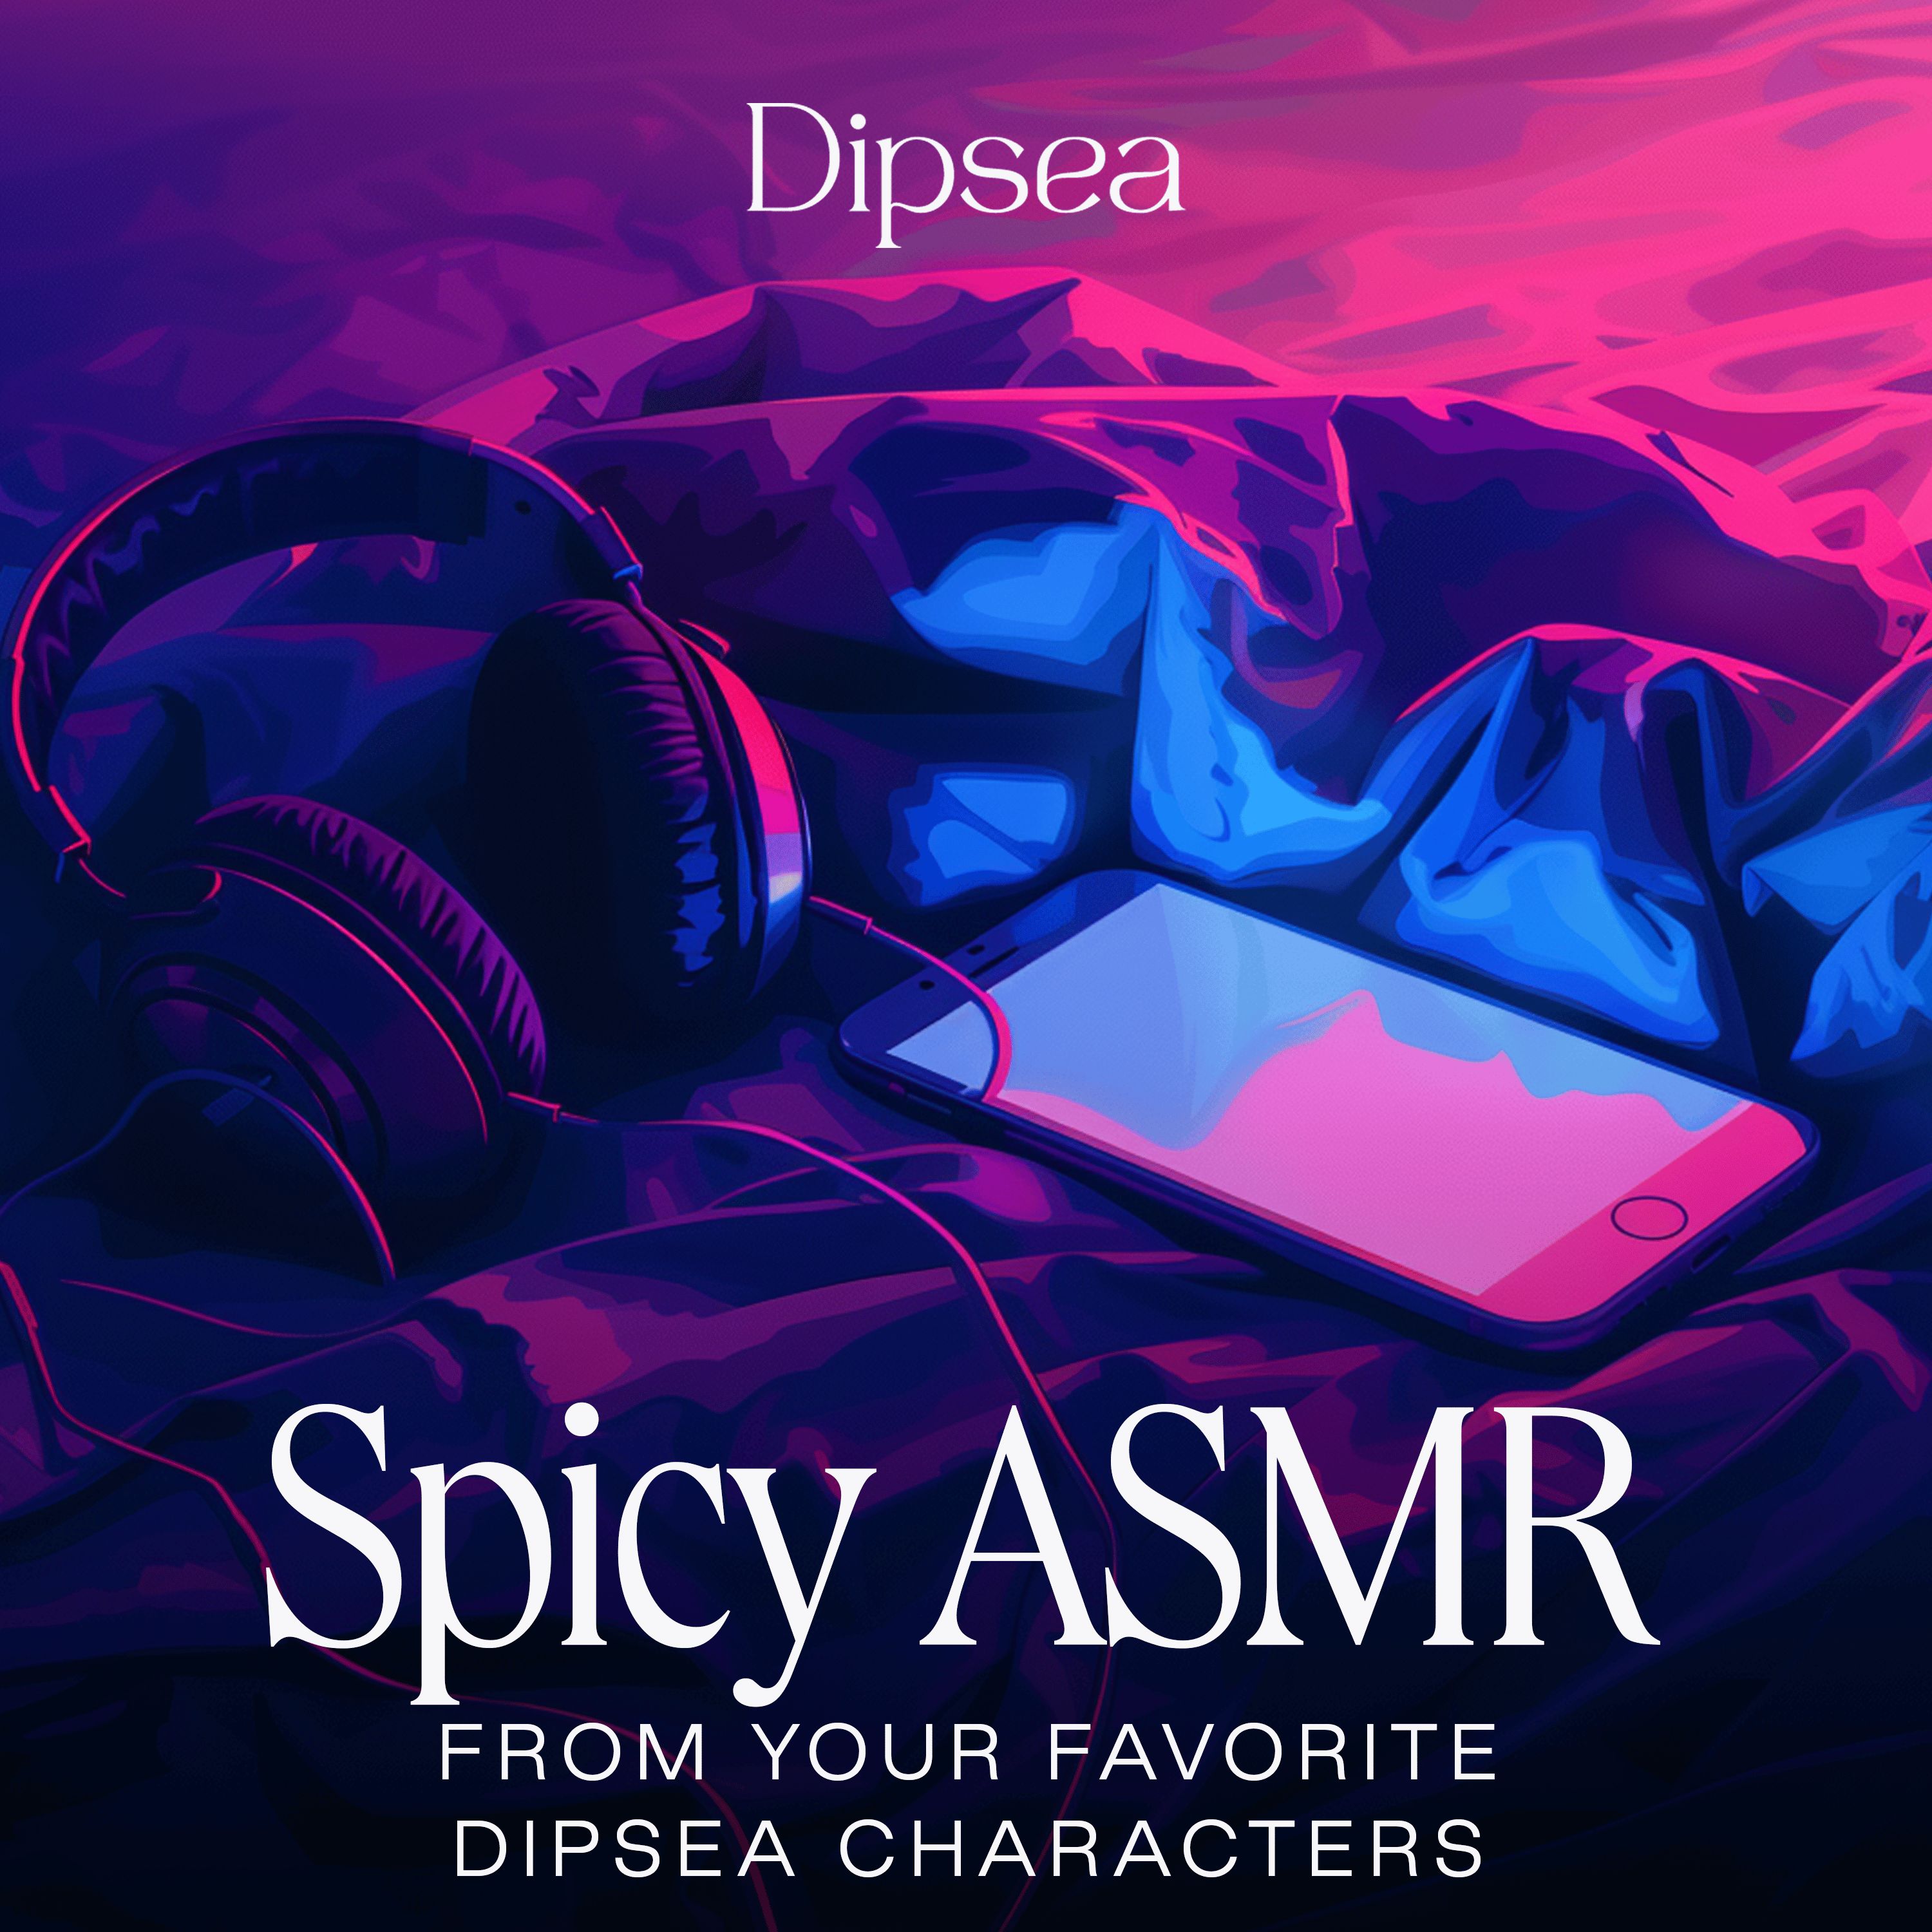 Artwork for Spicy ASMR by Dipsea